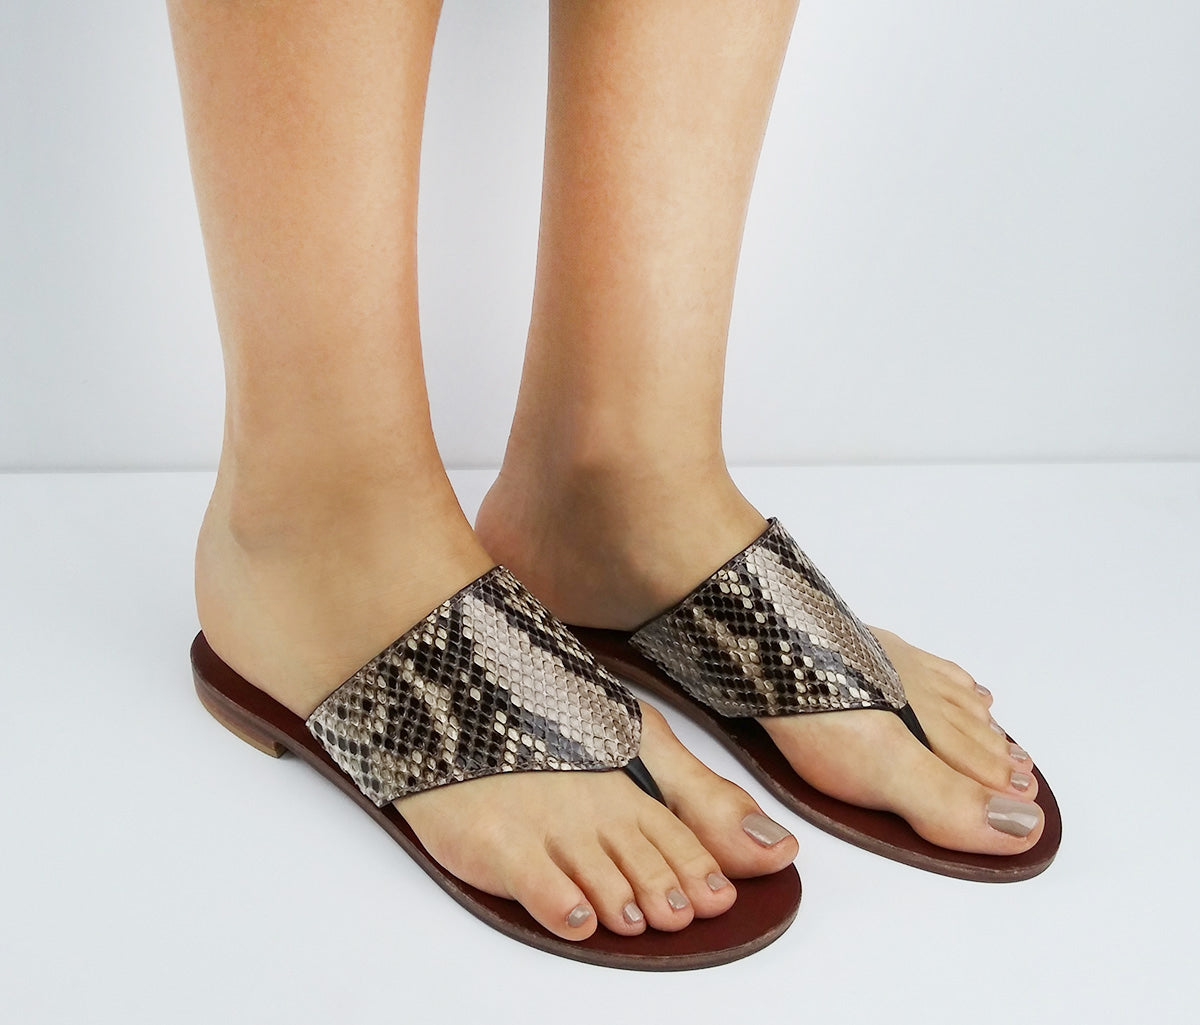 Genuine Python Flat Thong Sandals. Sizes Available 6-10. [NEW: NON-SLIP & SOLE PROTECTOR]